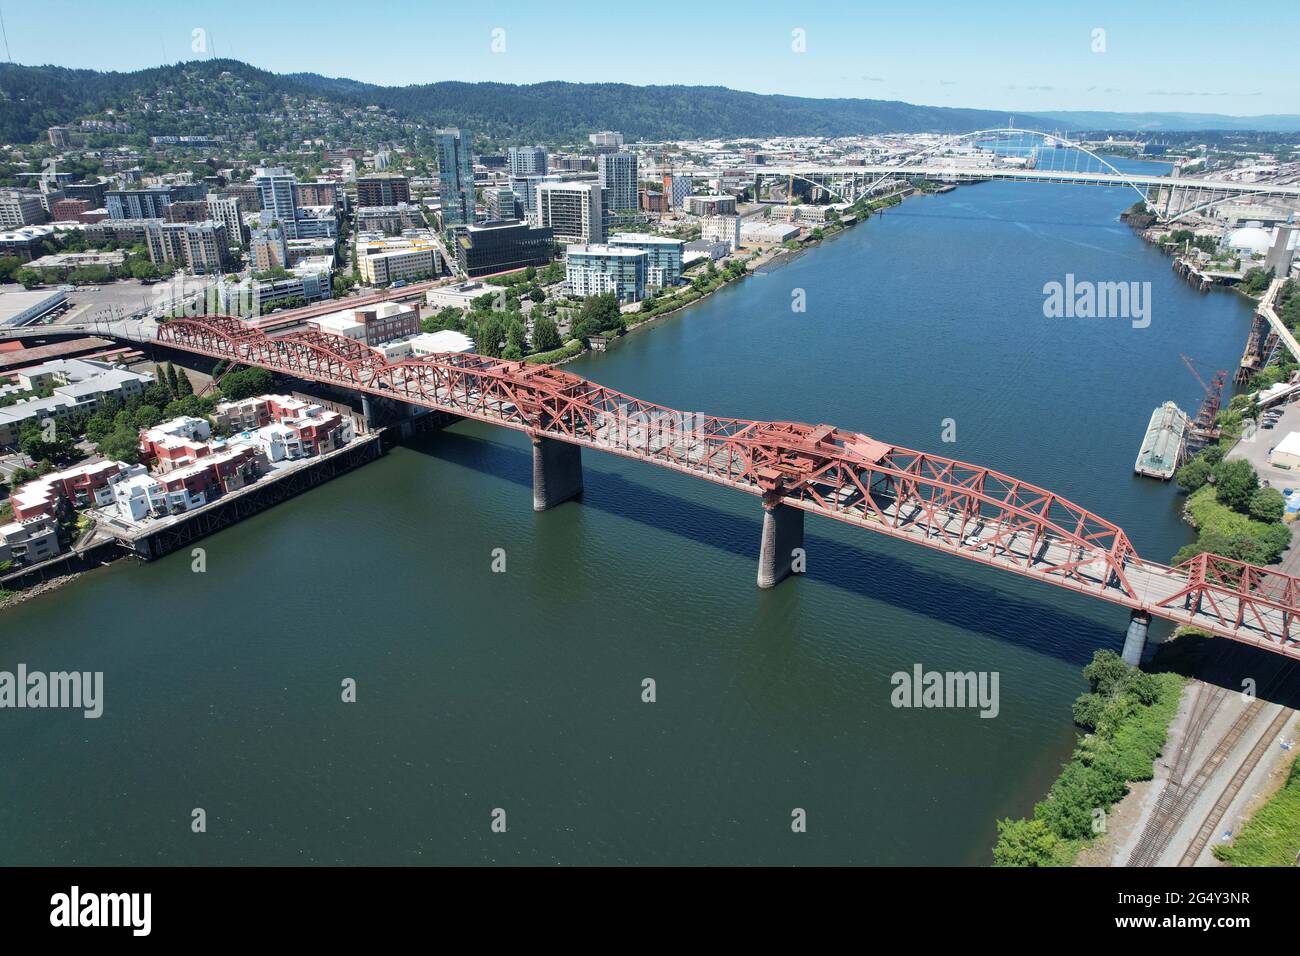 An aerial view of the Broadway Bridge and the Freemont Bridge over the Williamette River with the downtown Portland, Ore. skyline as a backdrop, Wedne Stock Photo